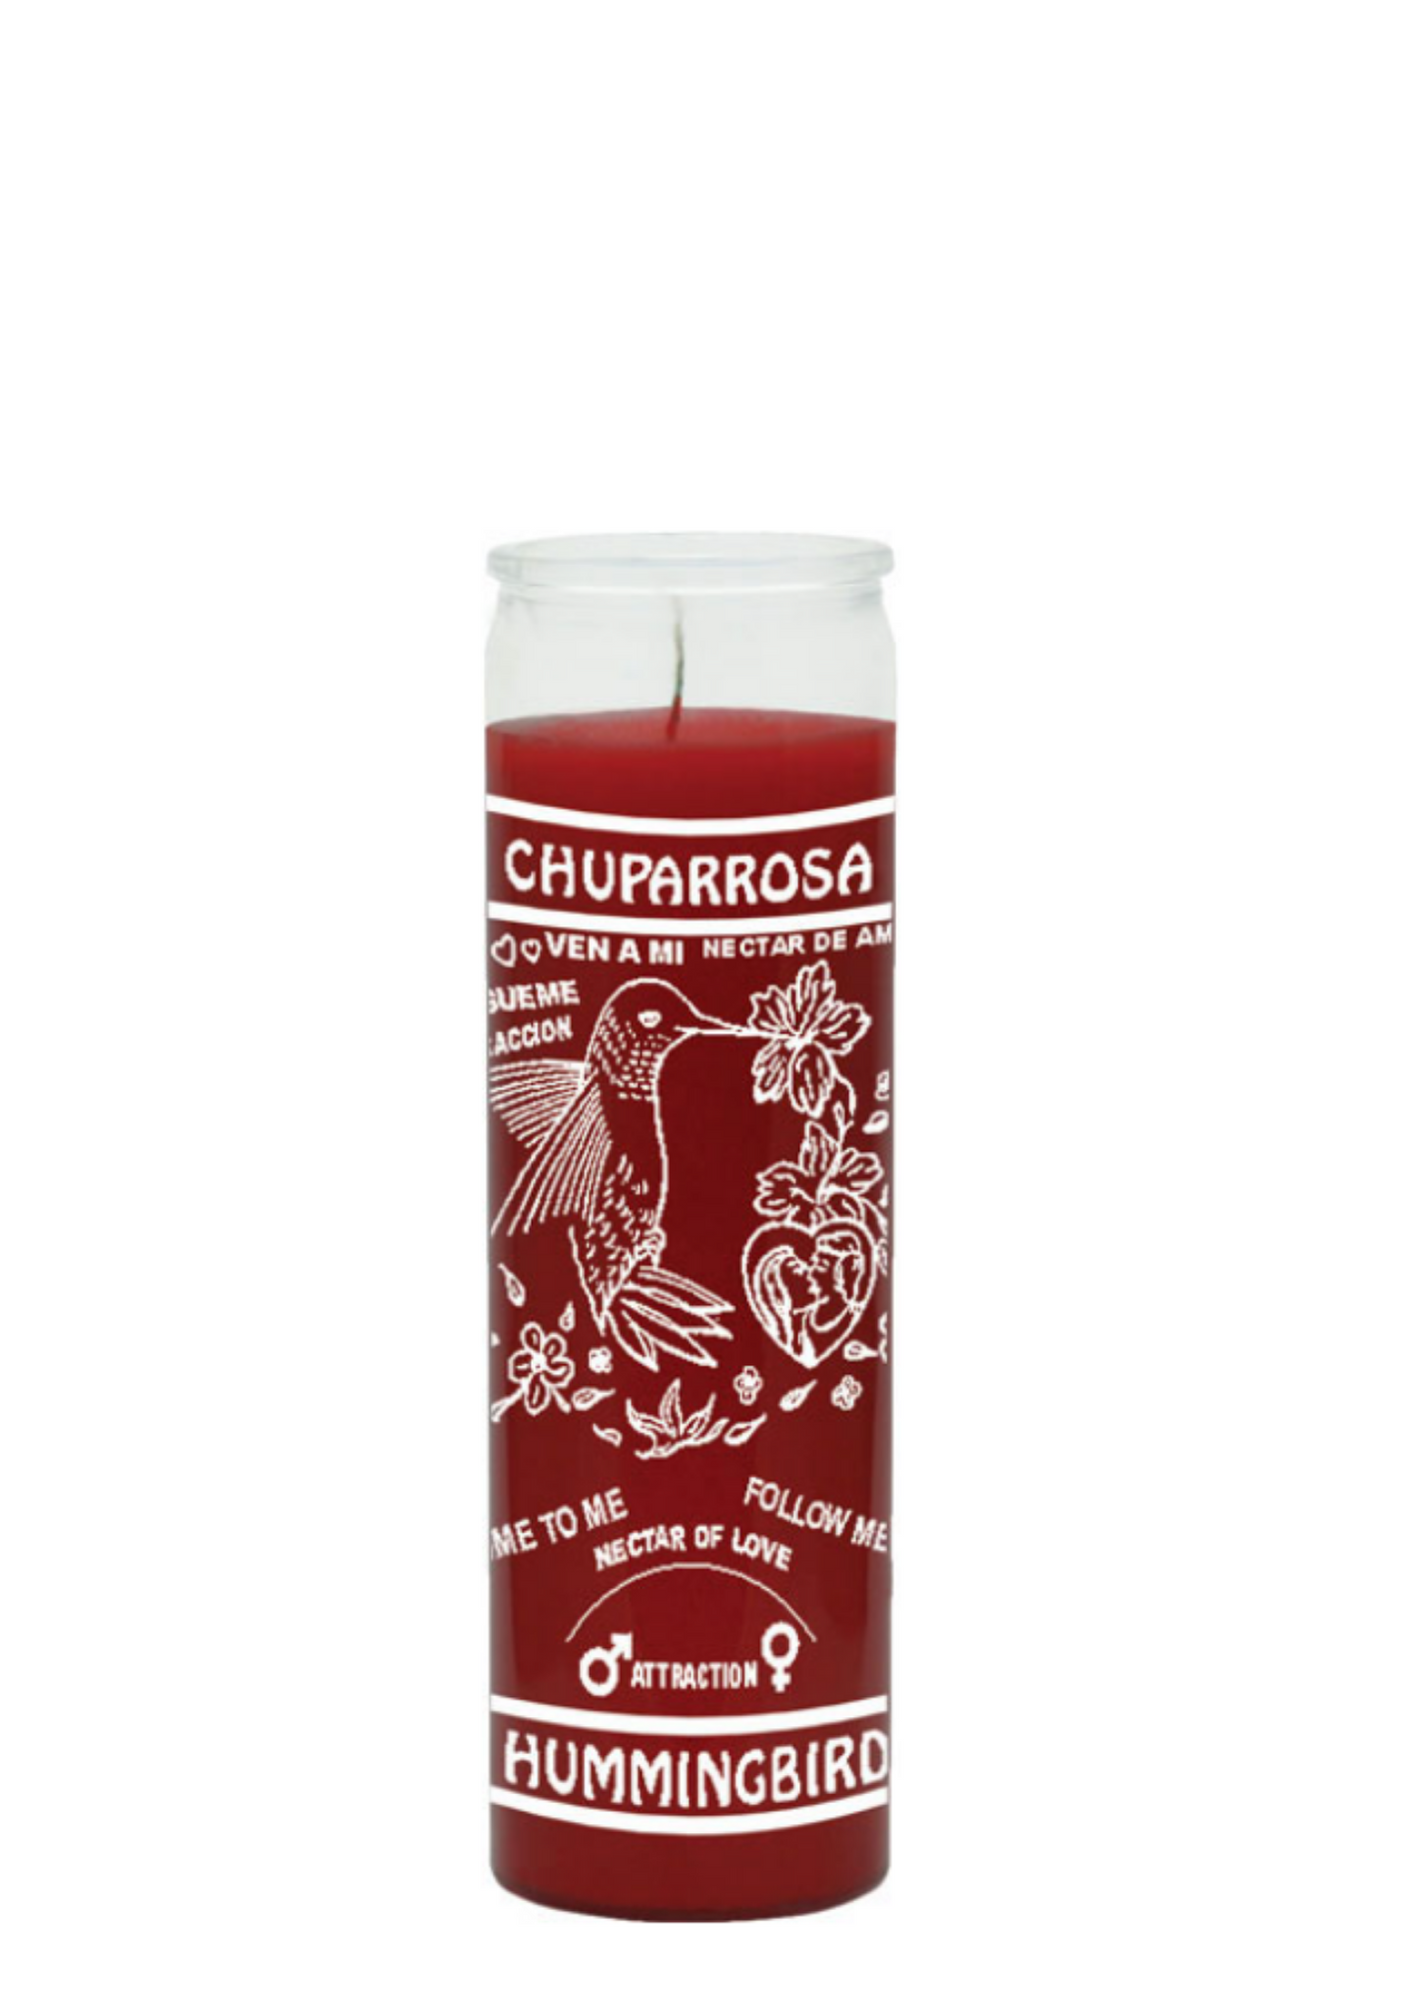 Hummingbird/chuparrsa 1 color (red) 7 day candle